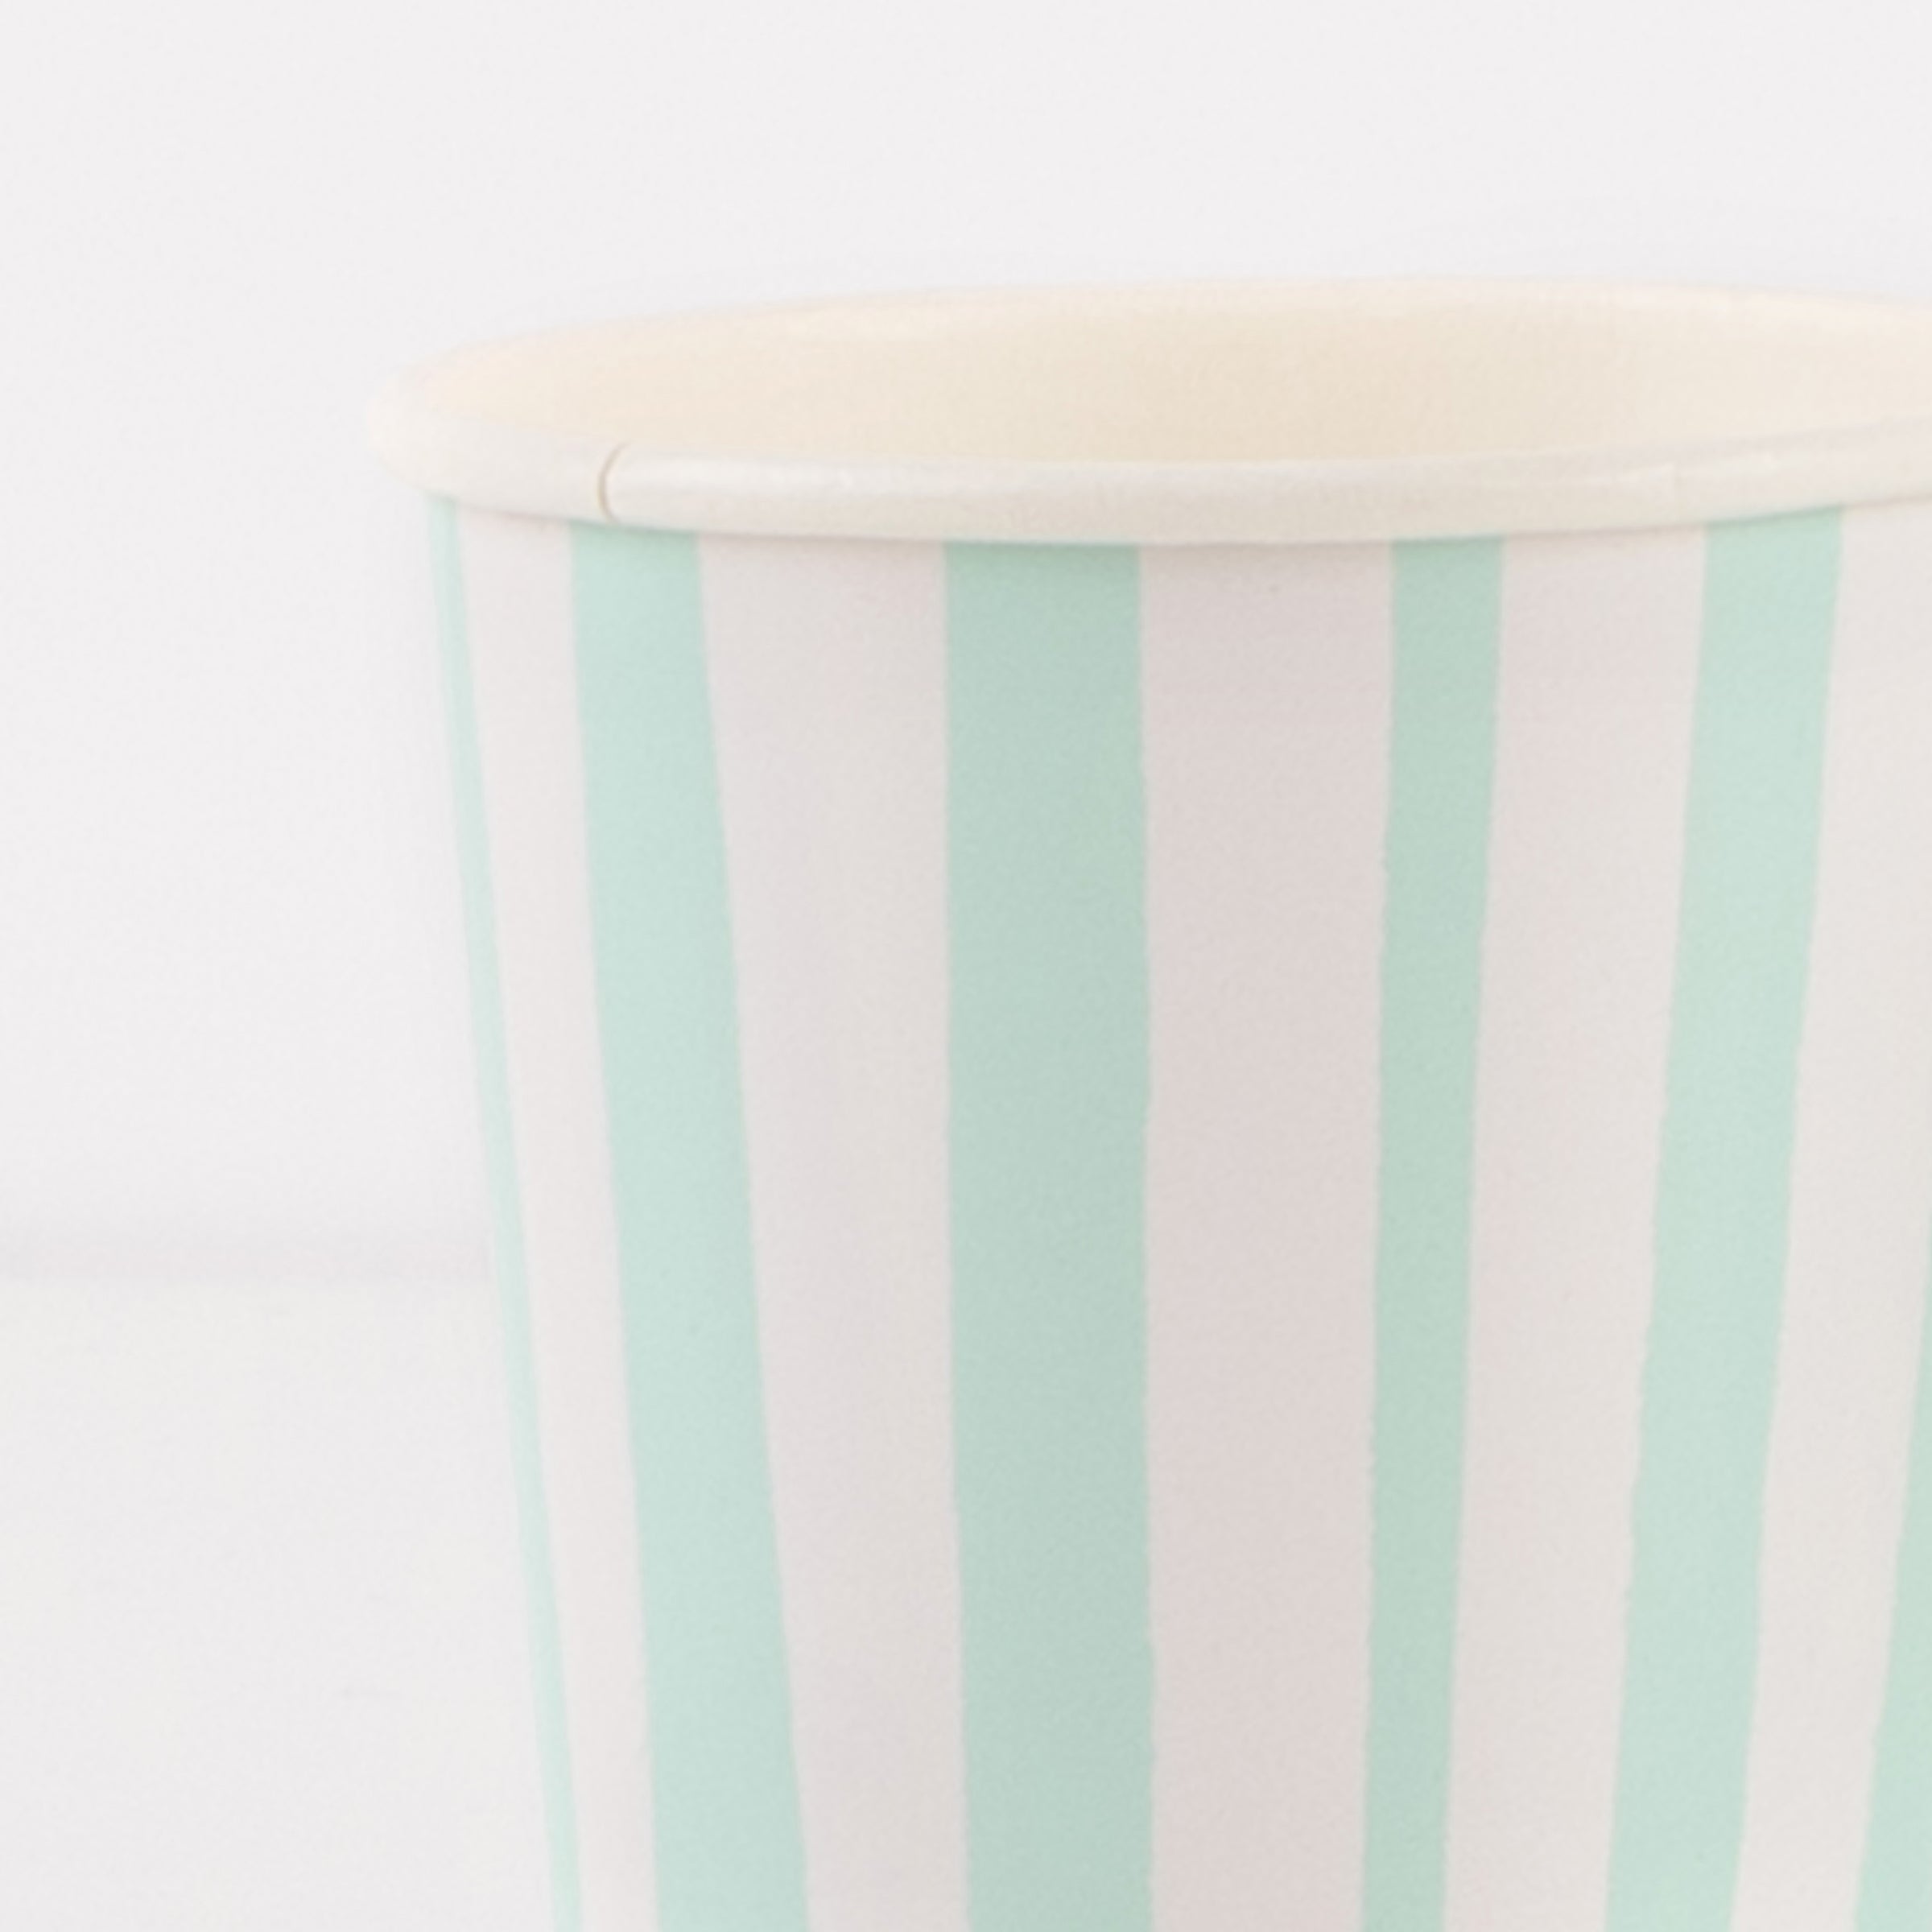 Our party cups, mint striped cups, are ideal to add to your birthday party supplies.